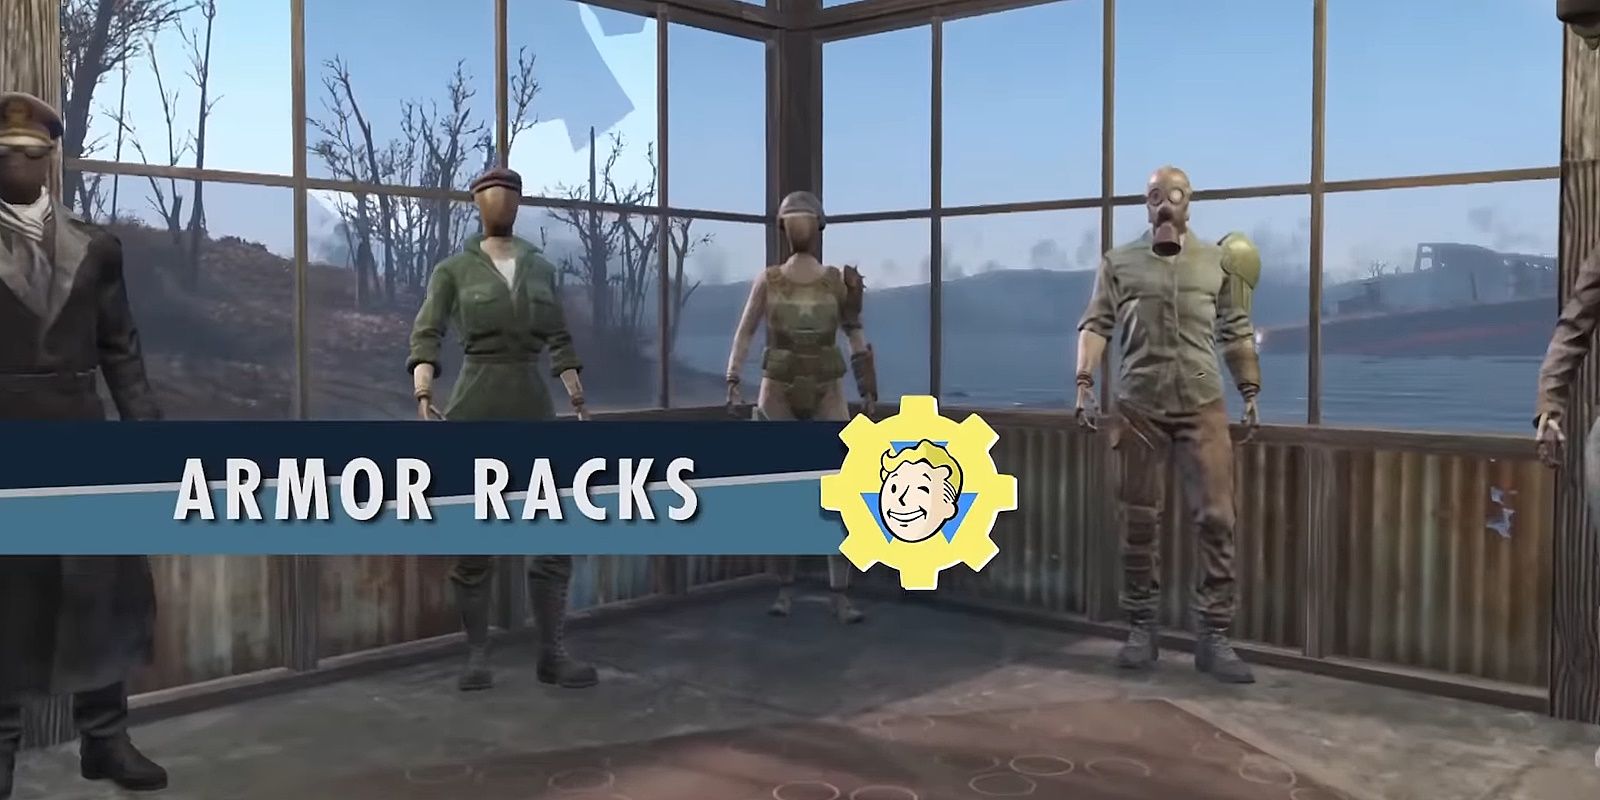 Every Fallout 4 DLC, Ranked (& Which Ones Are Worth Buying)